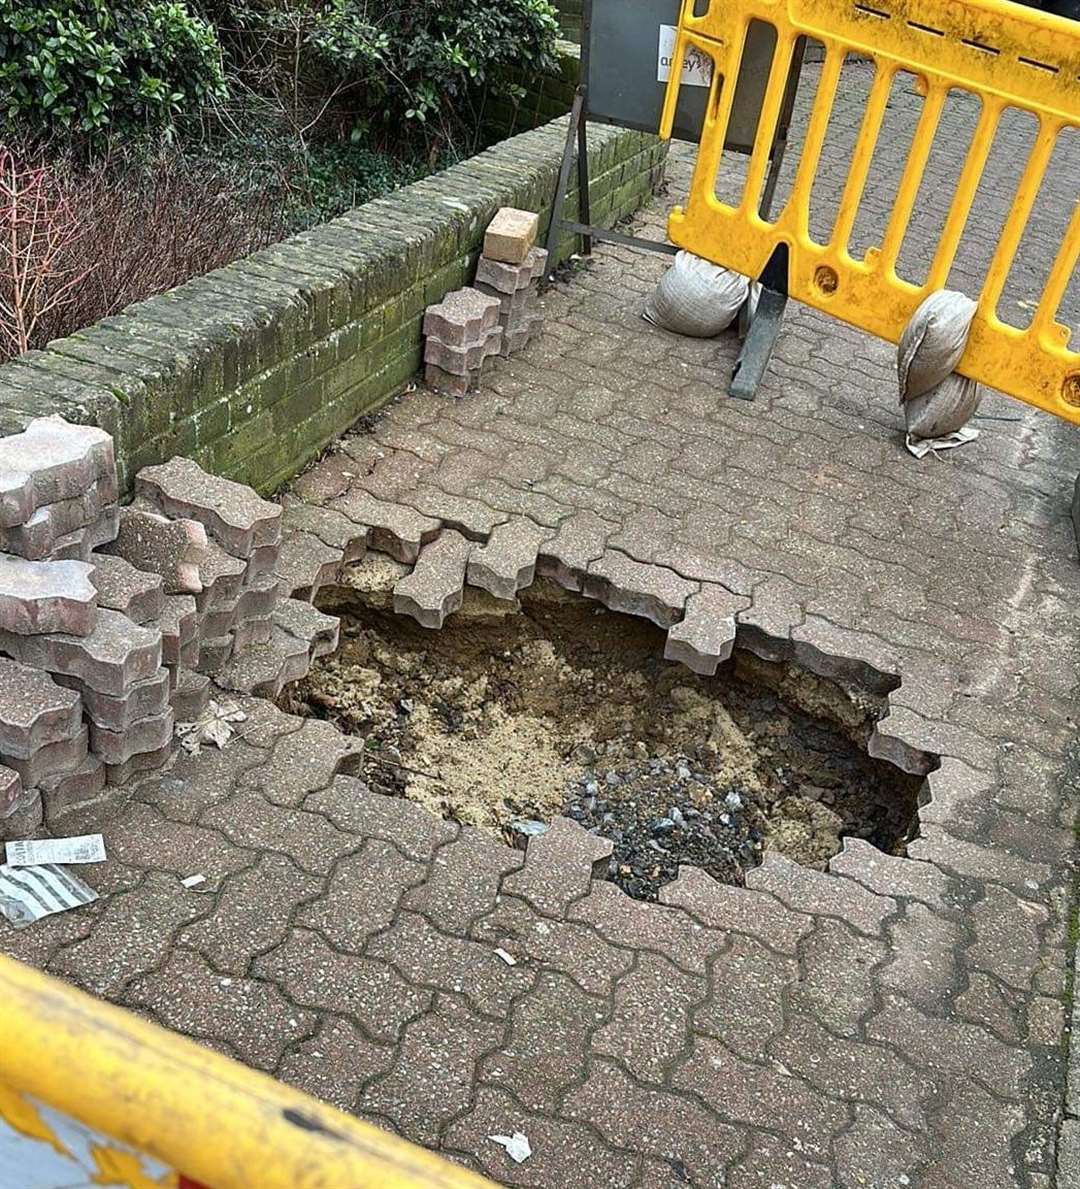 The hole outside the library and cafe in Main Road, Sutton-at-Hone